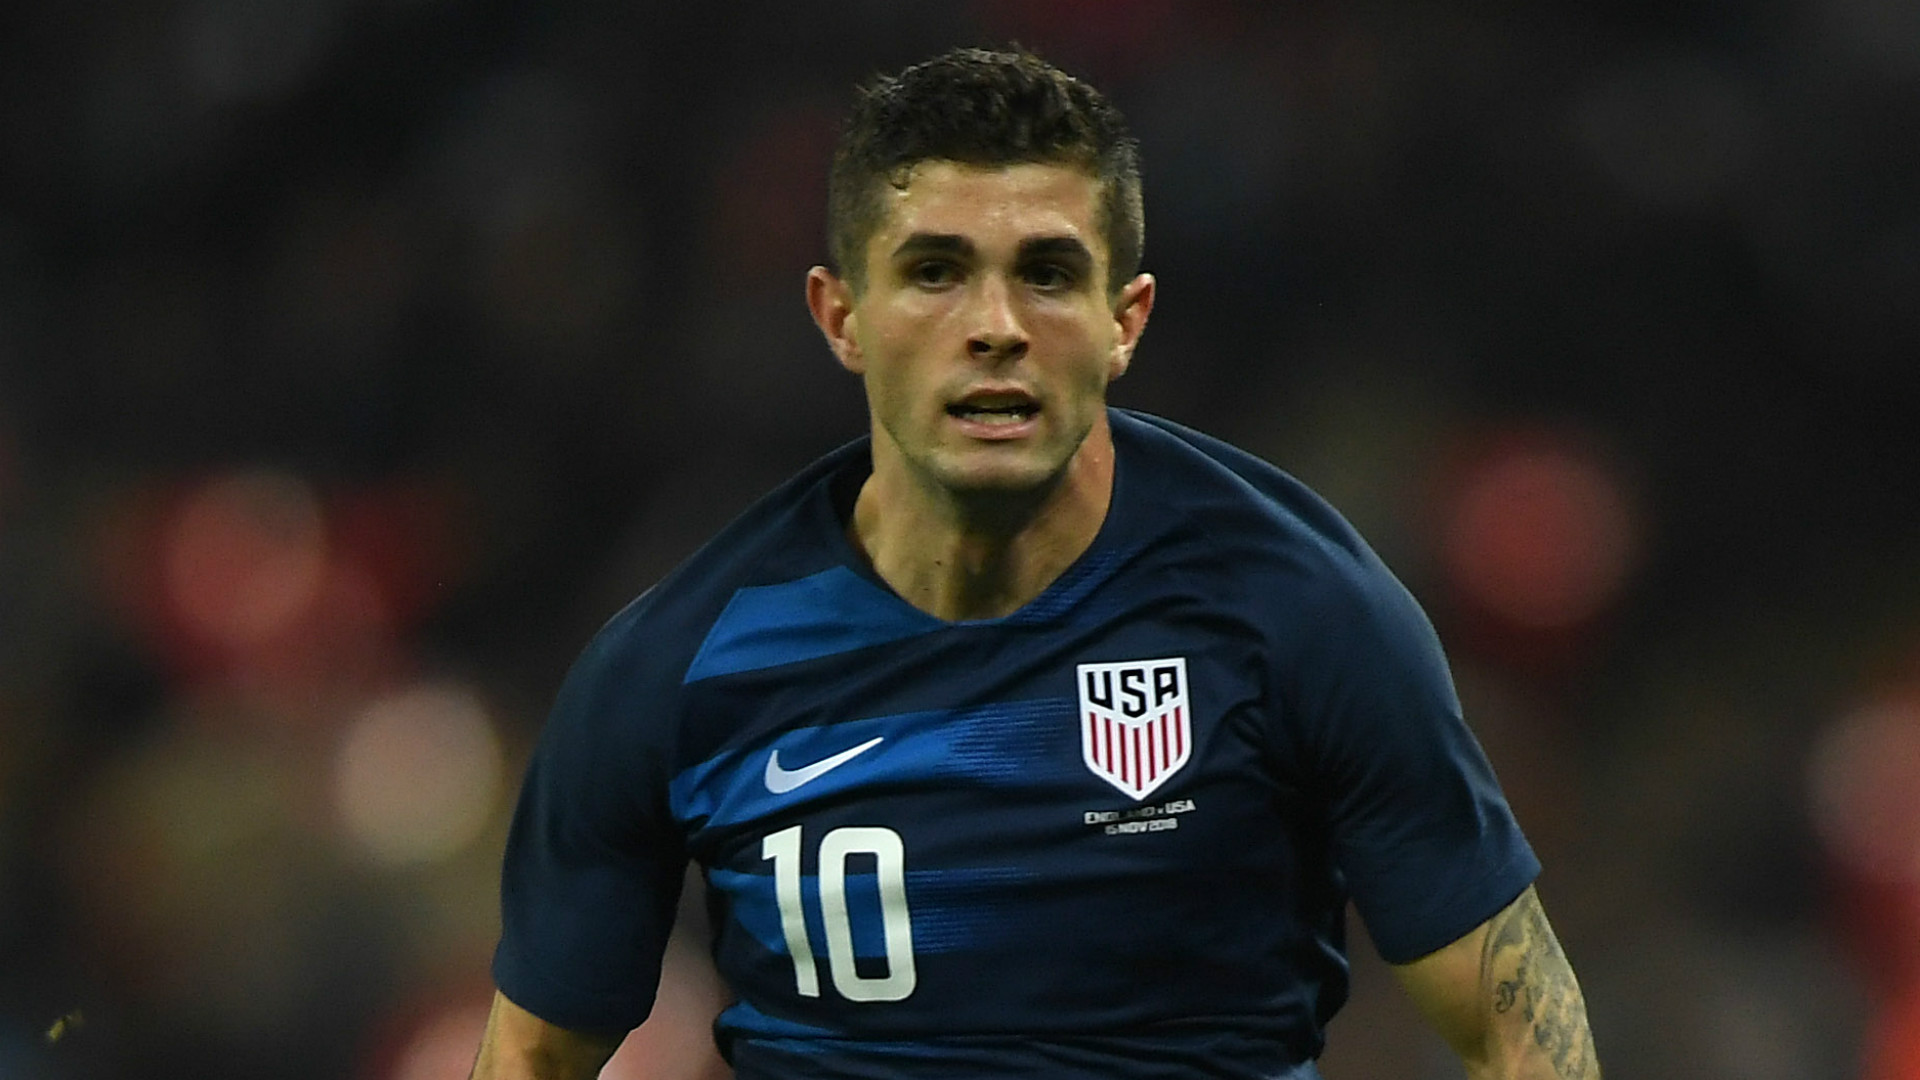 USMNT: Christian Pulisic's Premier League move and 10 things for U.S